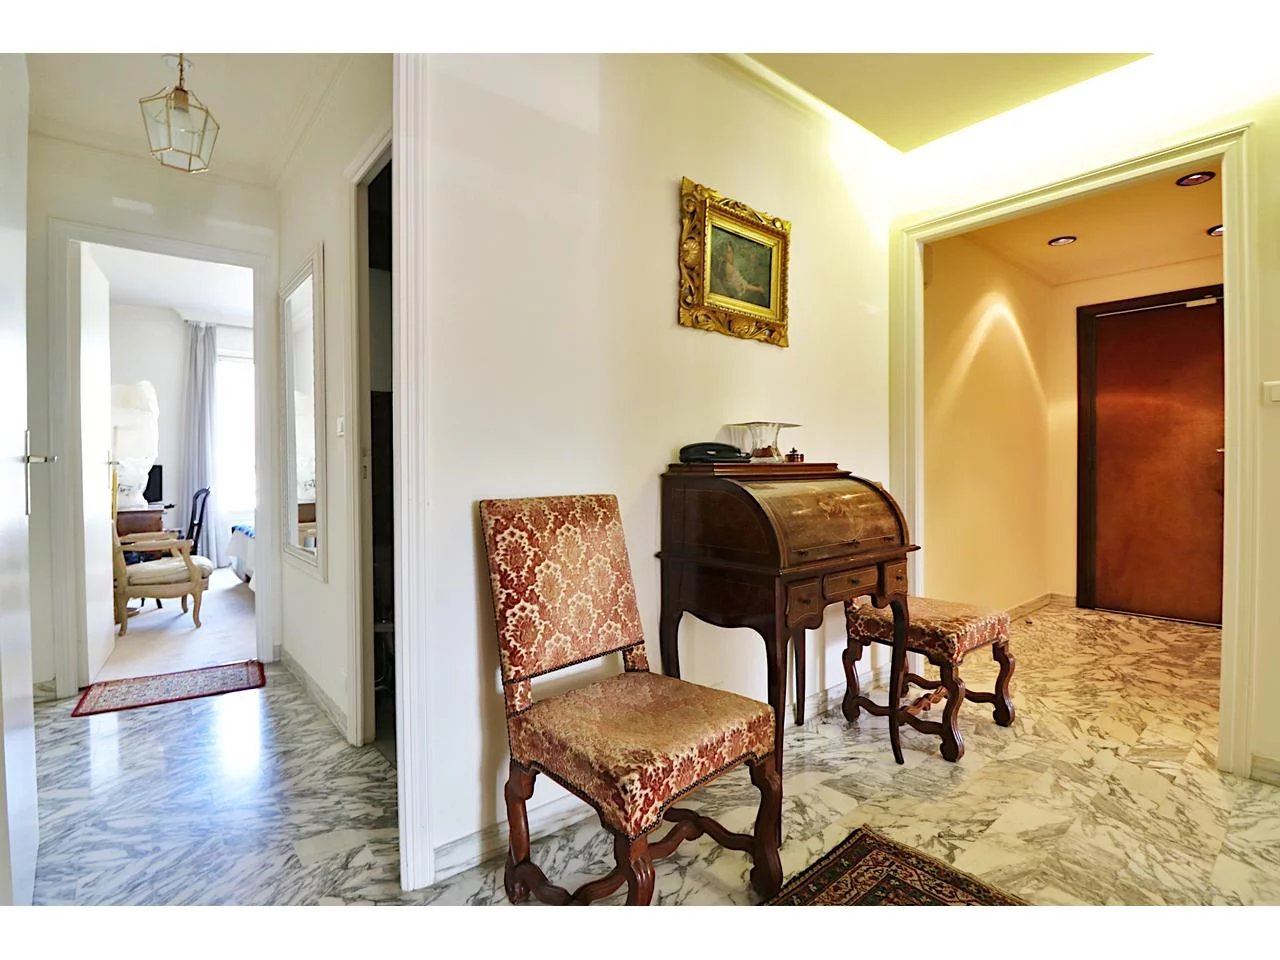 Appartement  3 Rooms 78.52m2  for sale   560 000 €